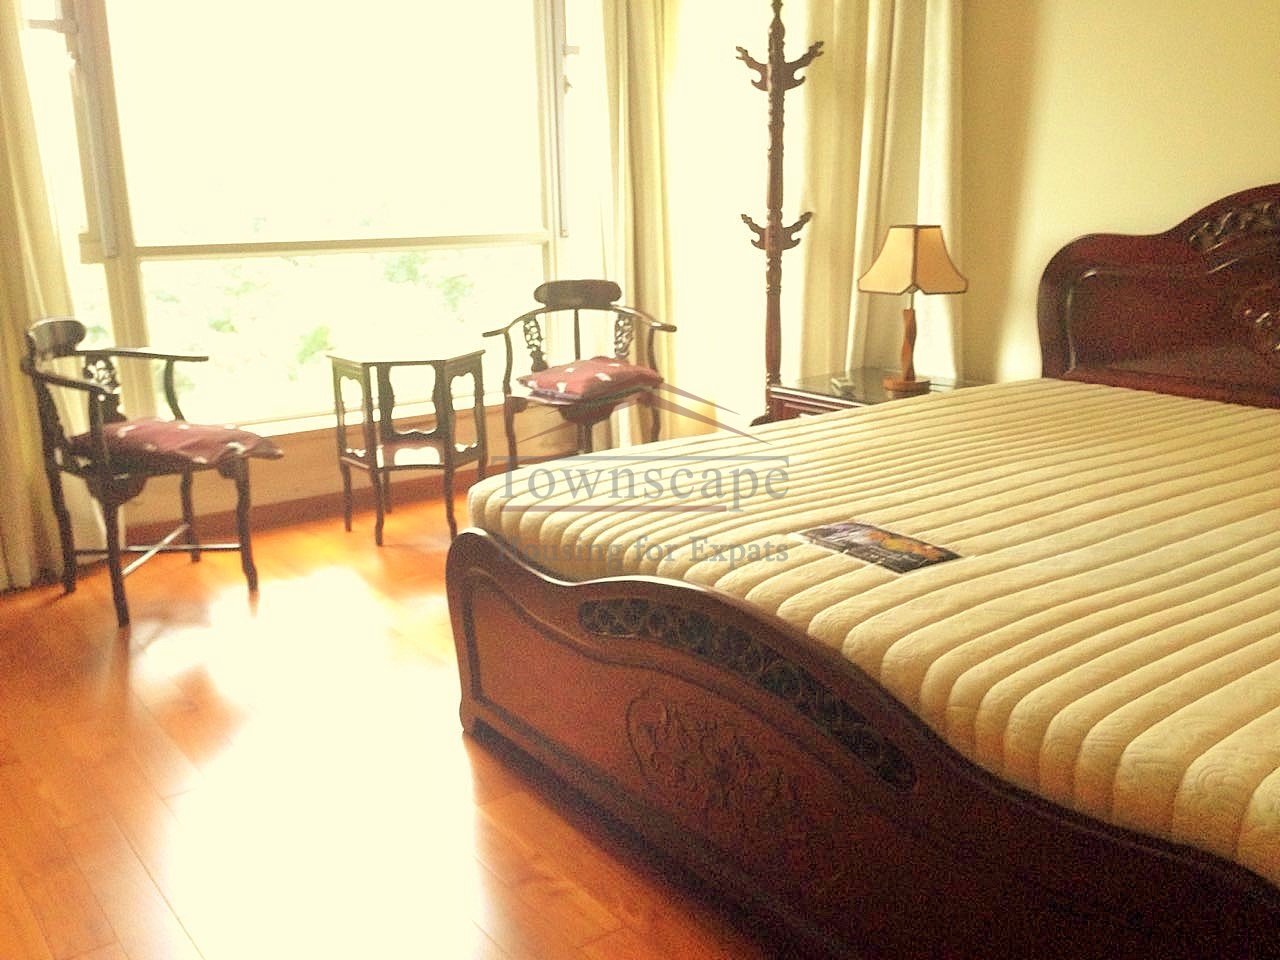  large 4 bedroom apartment in Pudong area, line 6